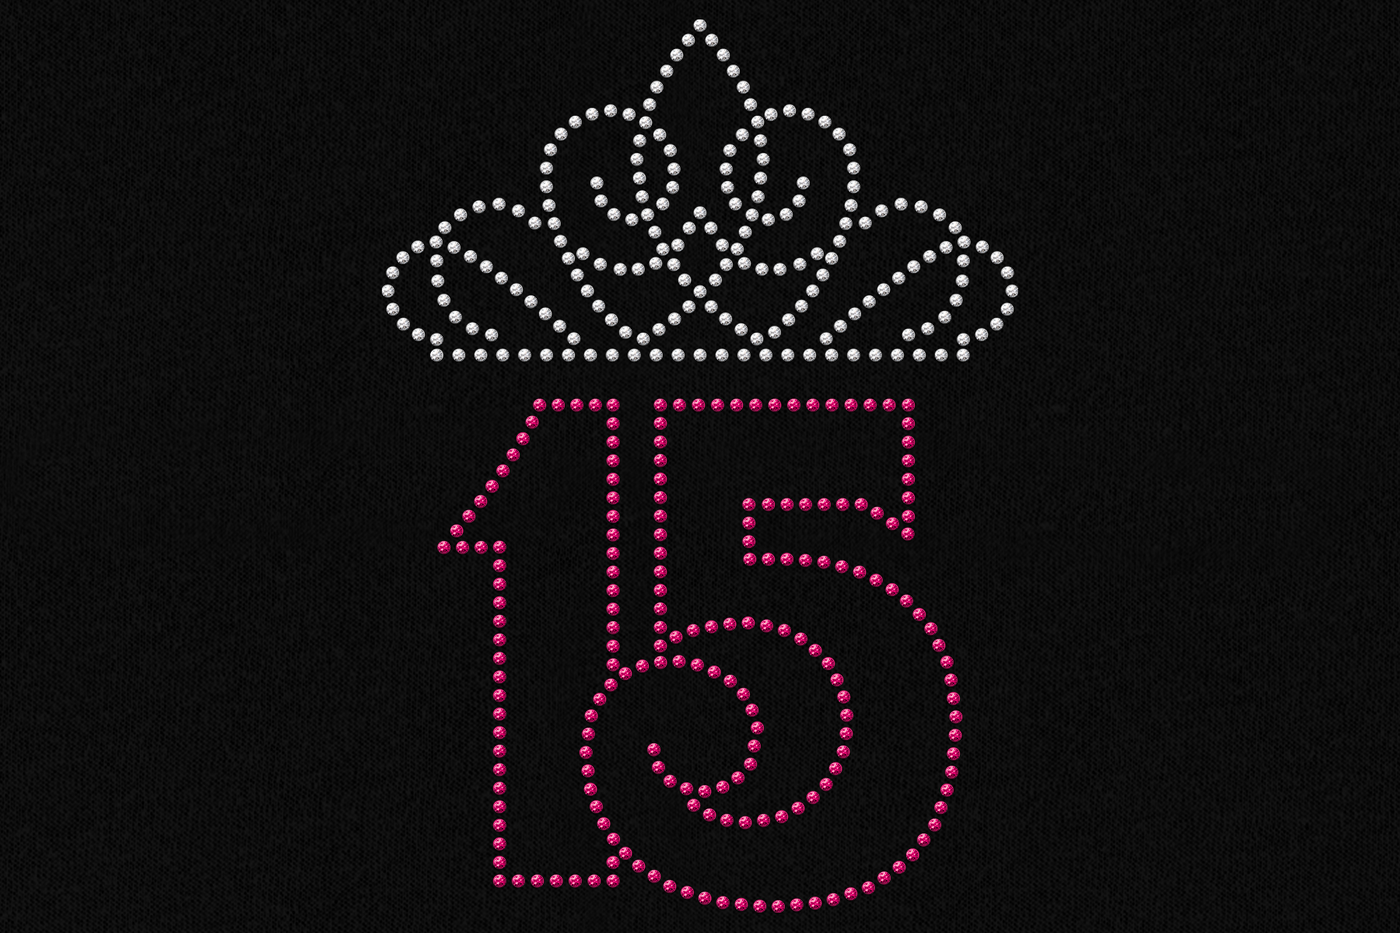 Closeup of a rhinestone design on black fabric. There is a 15 in hot pink rhinestones with a tiara in clear rhinestones above.